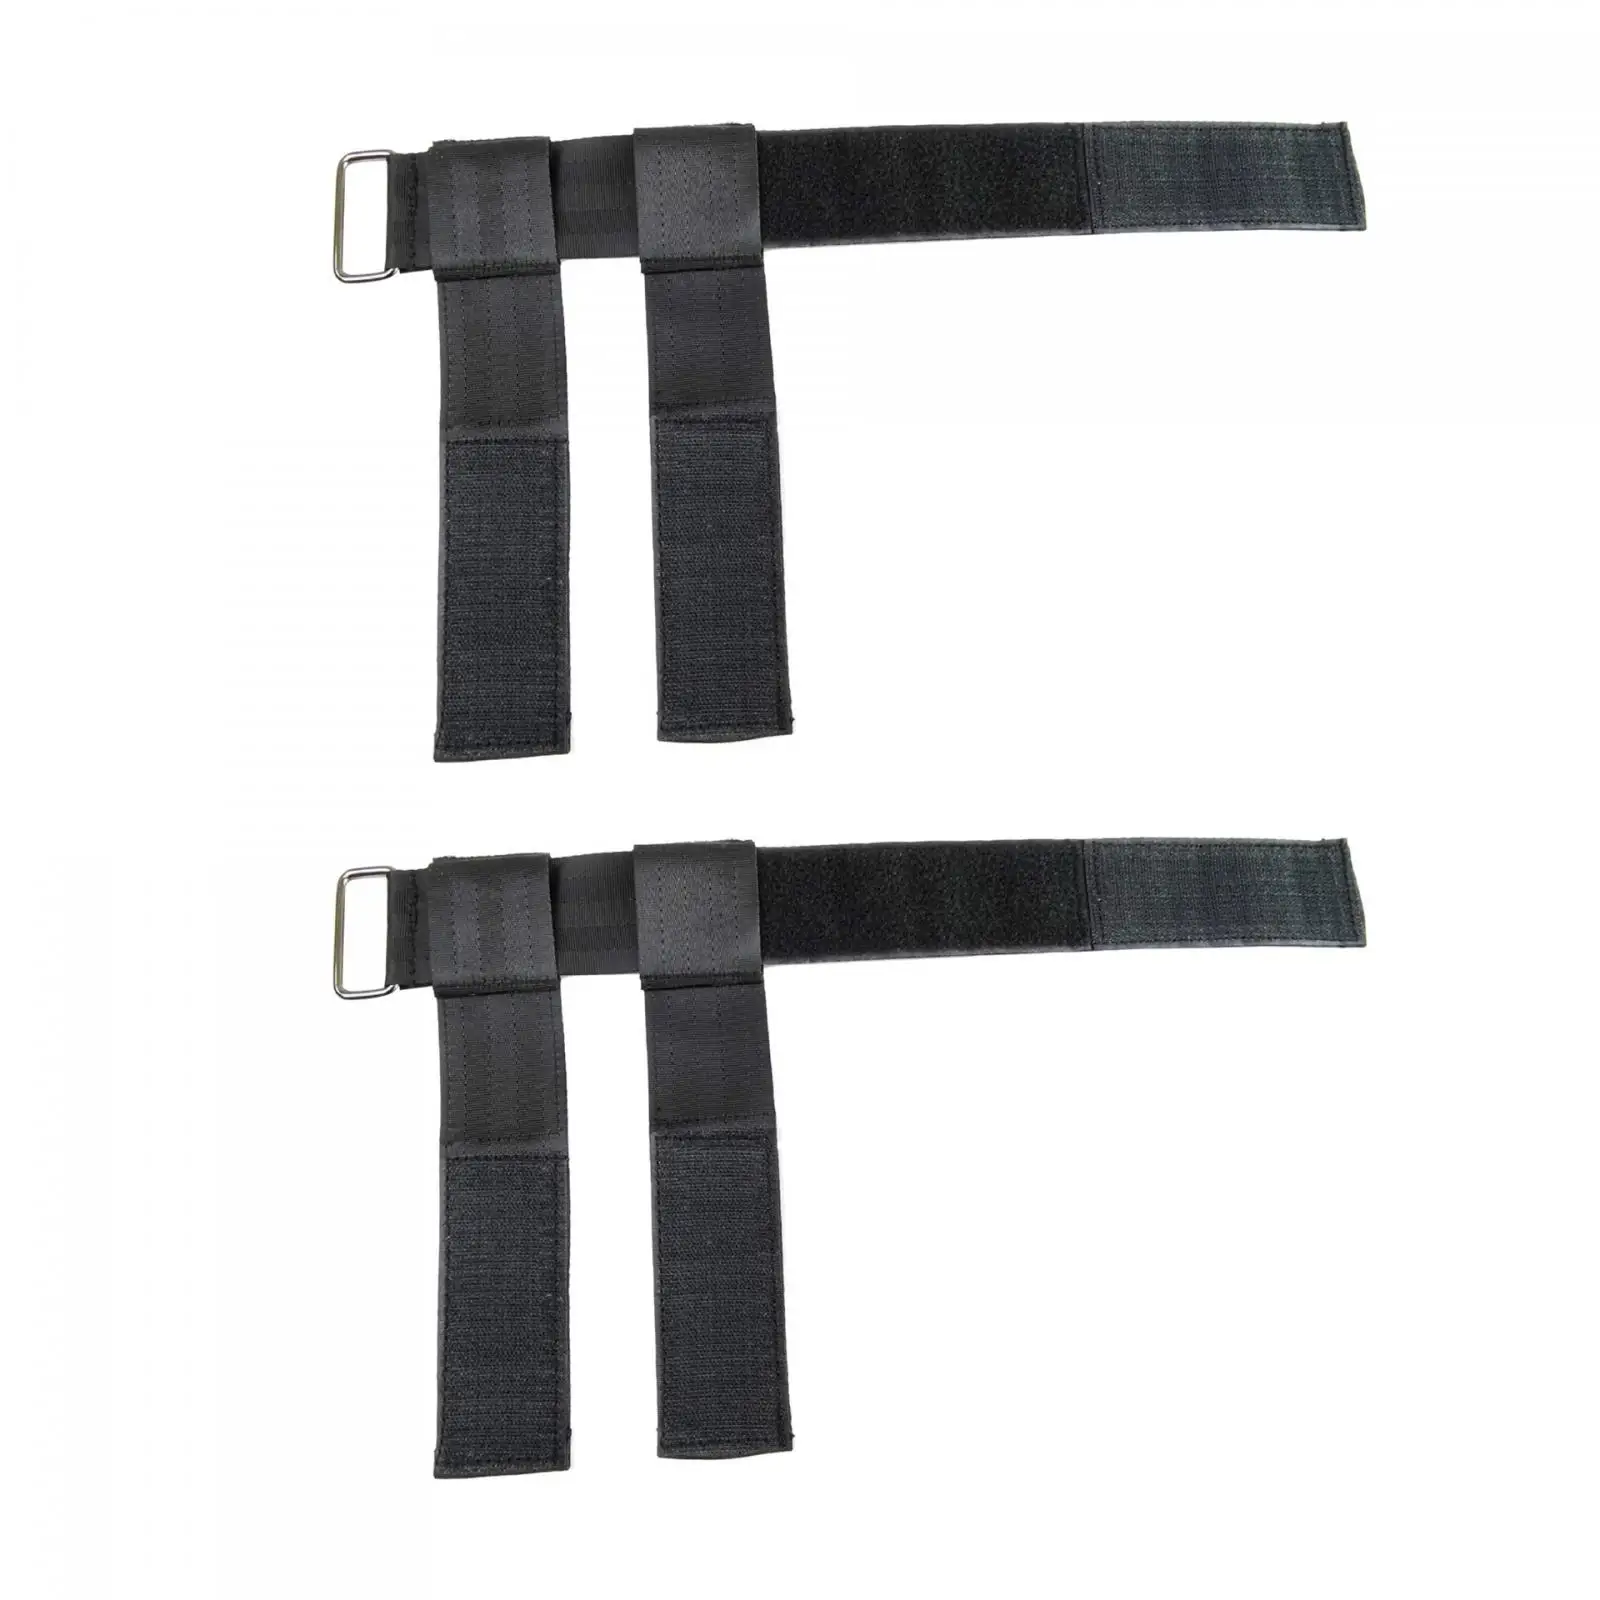 2Pcs D Ring Ankle Wear Resistant Cable Attachment Ankle Cuffs Thigh Leg Strap